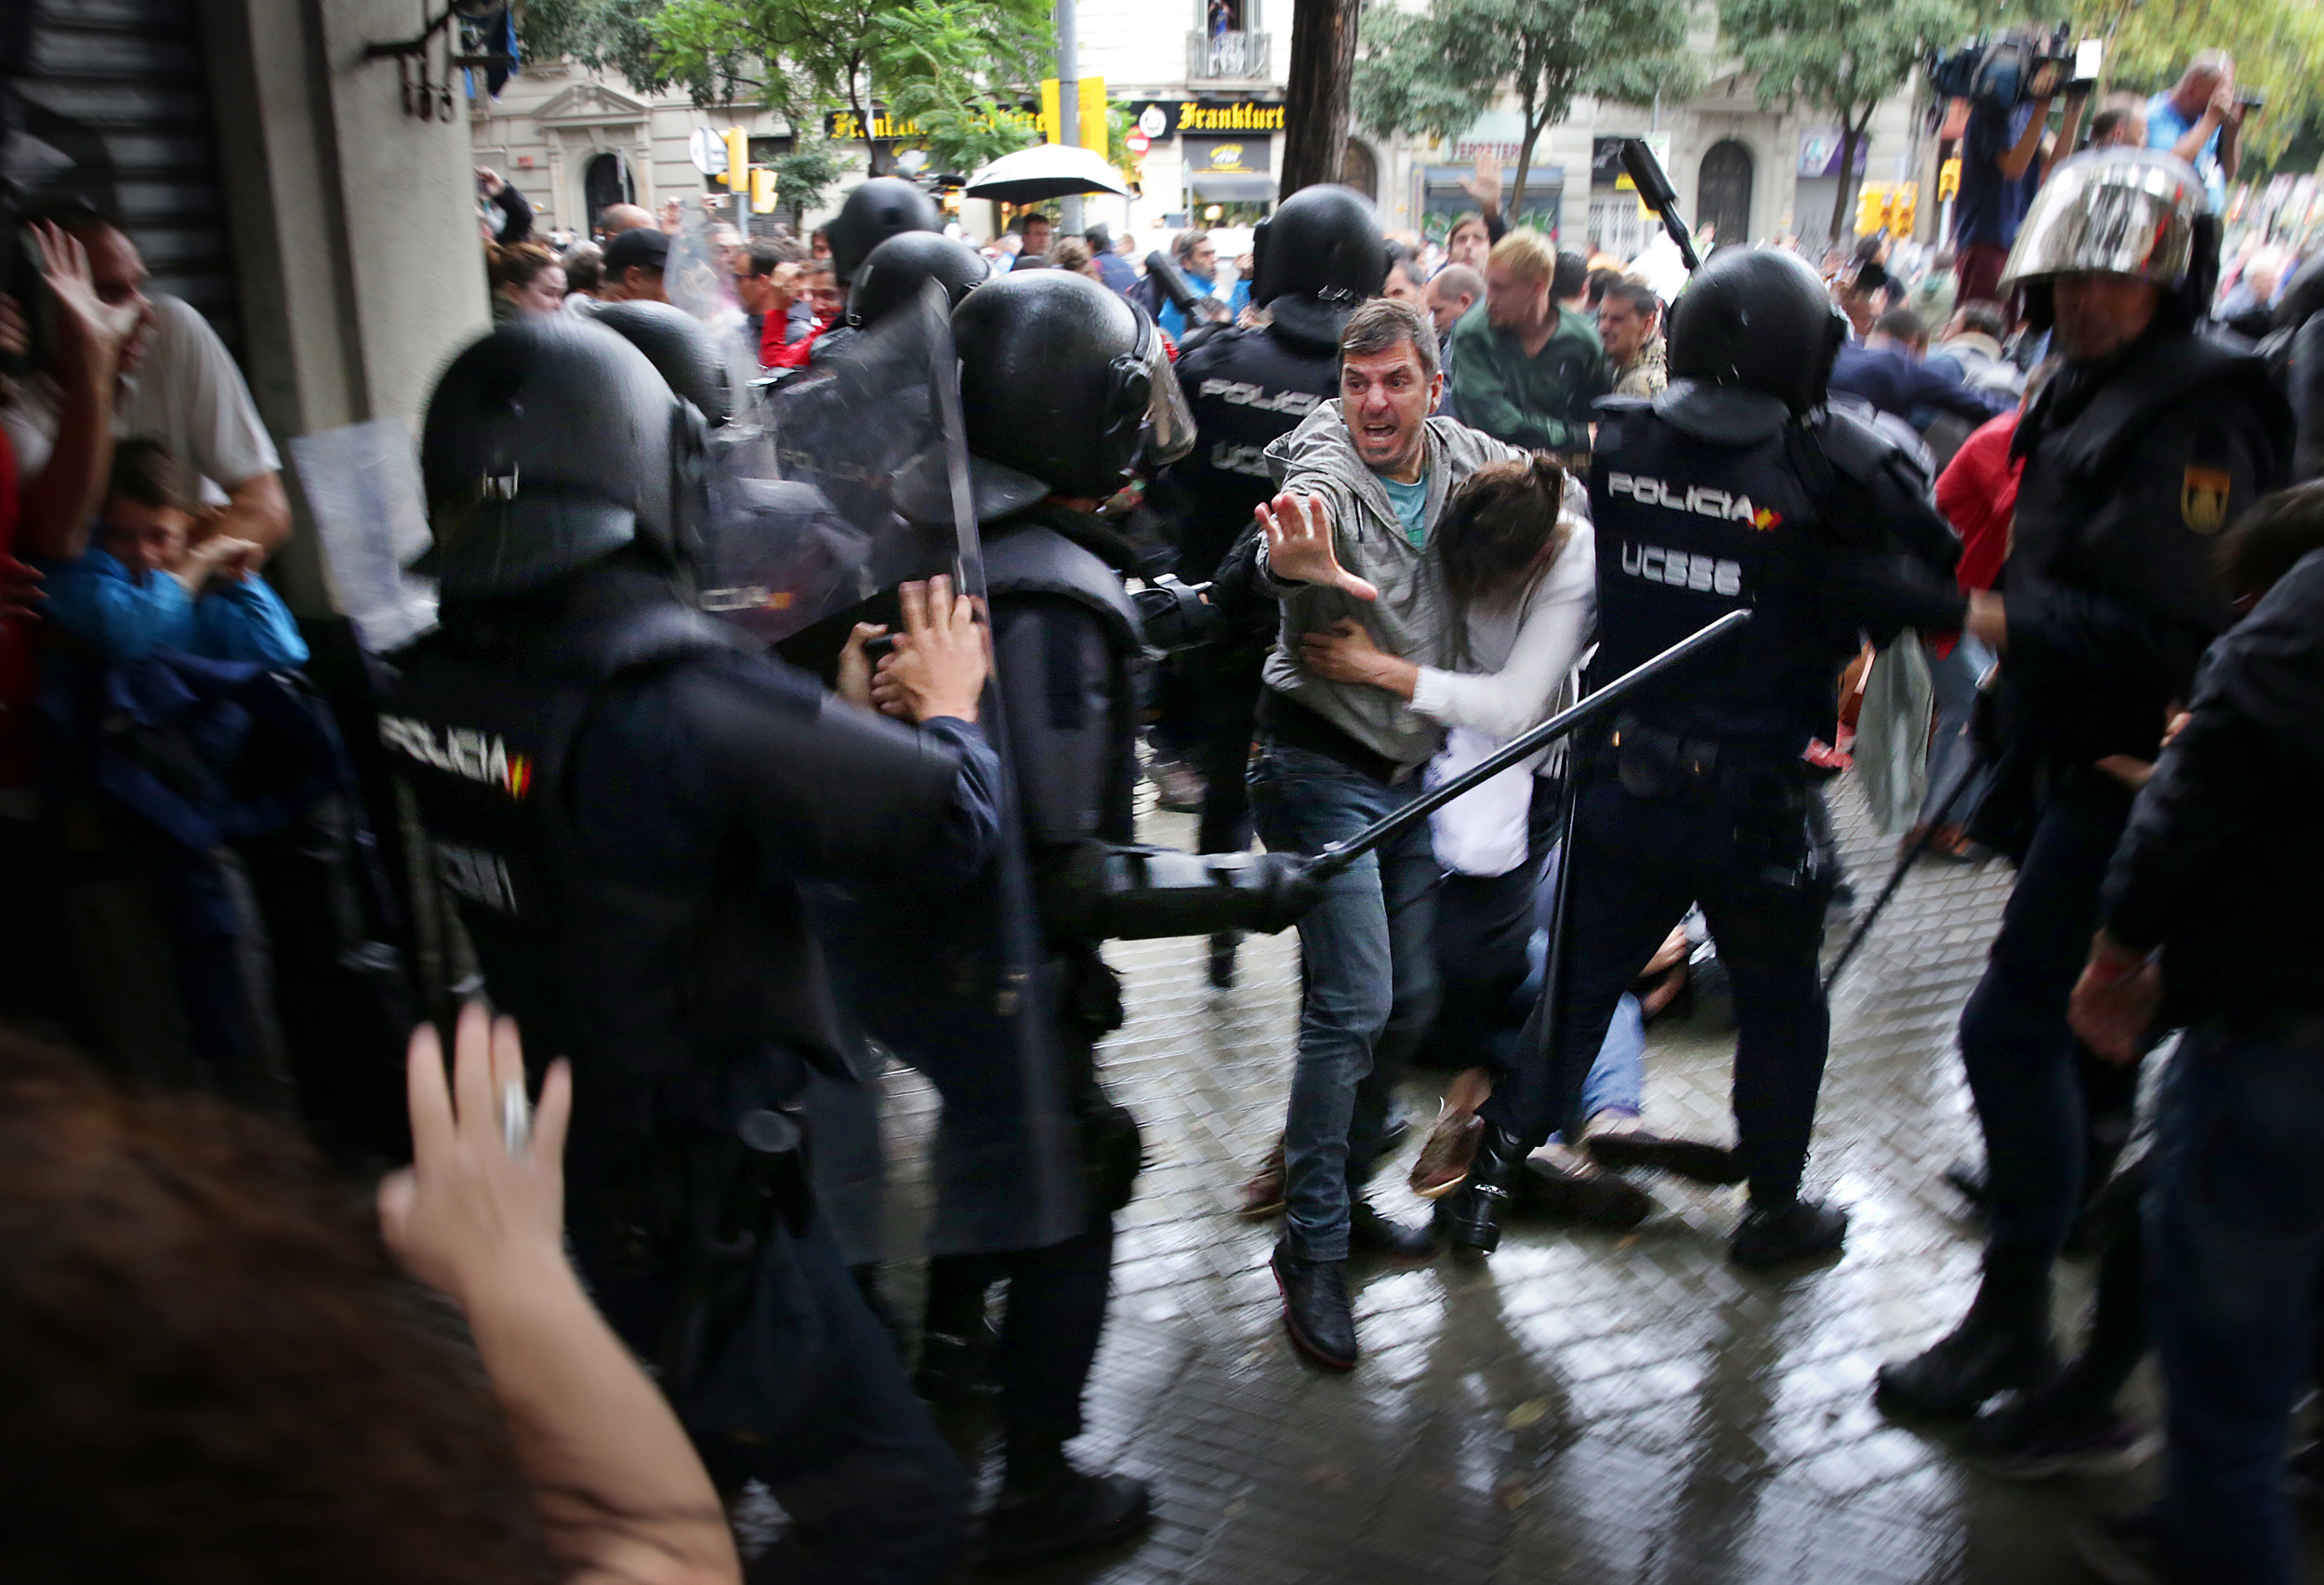 Police operation on October 1 (by Jordi Play)